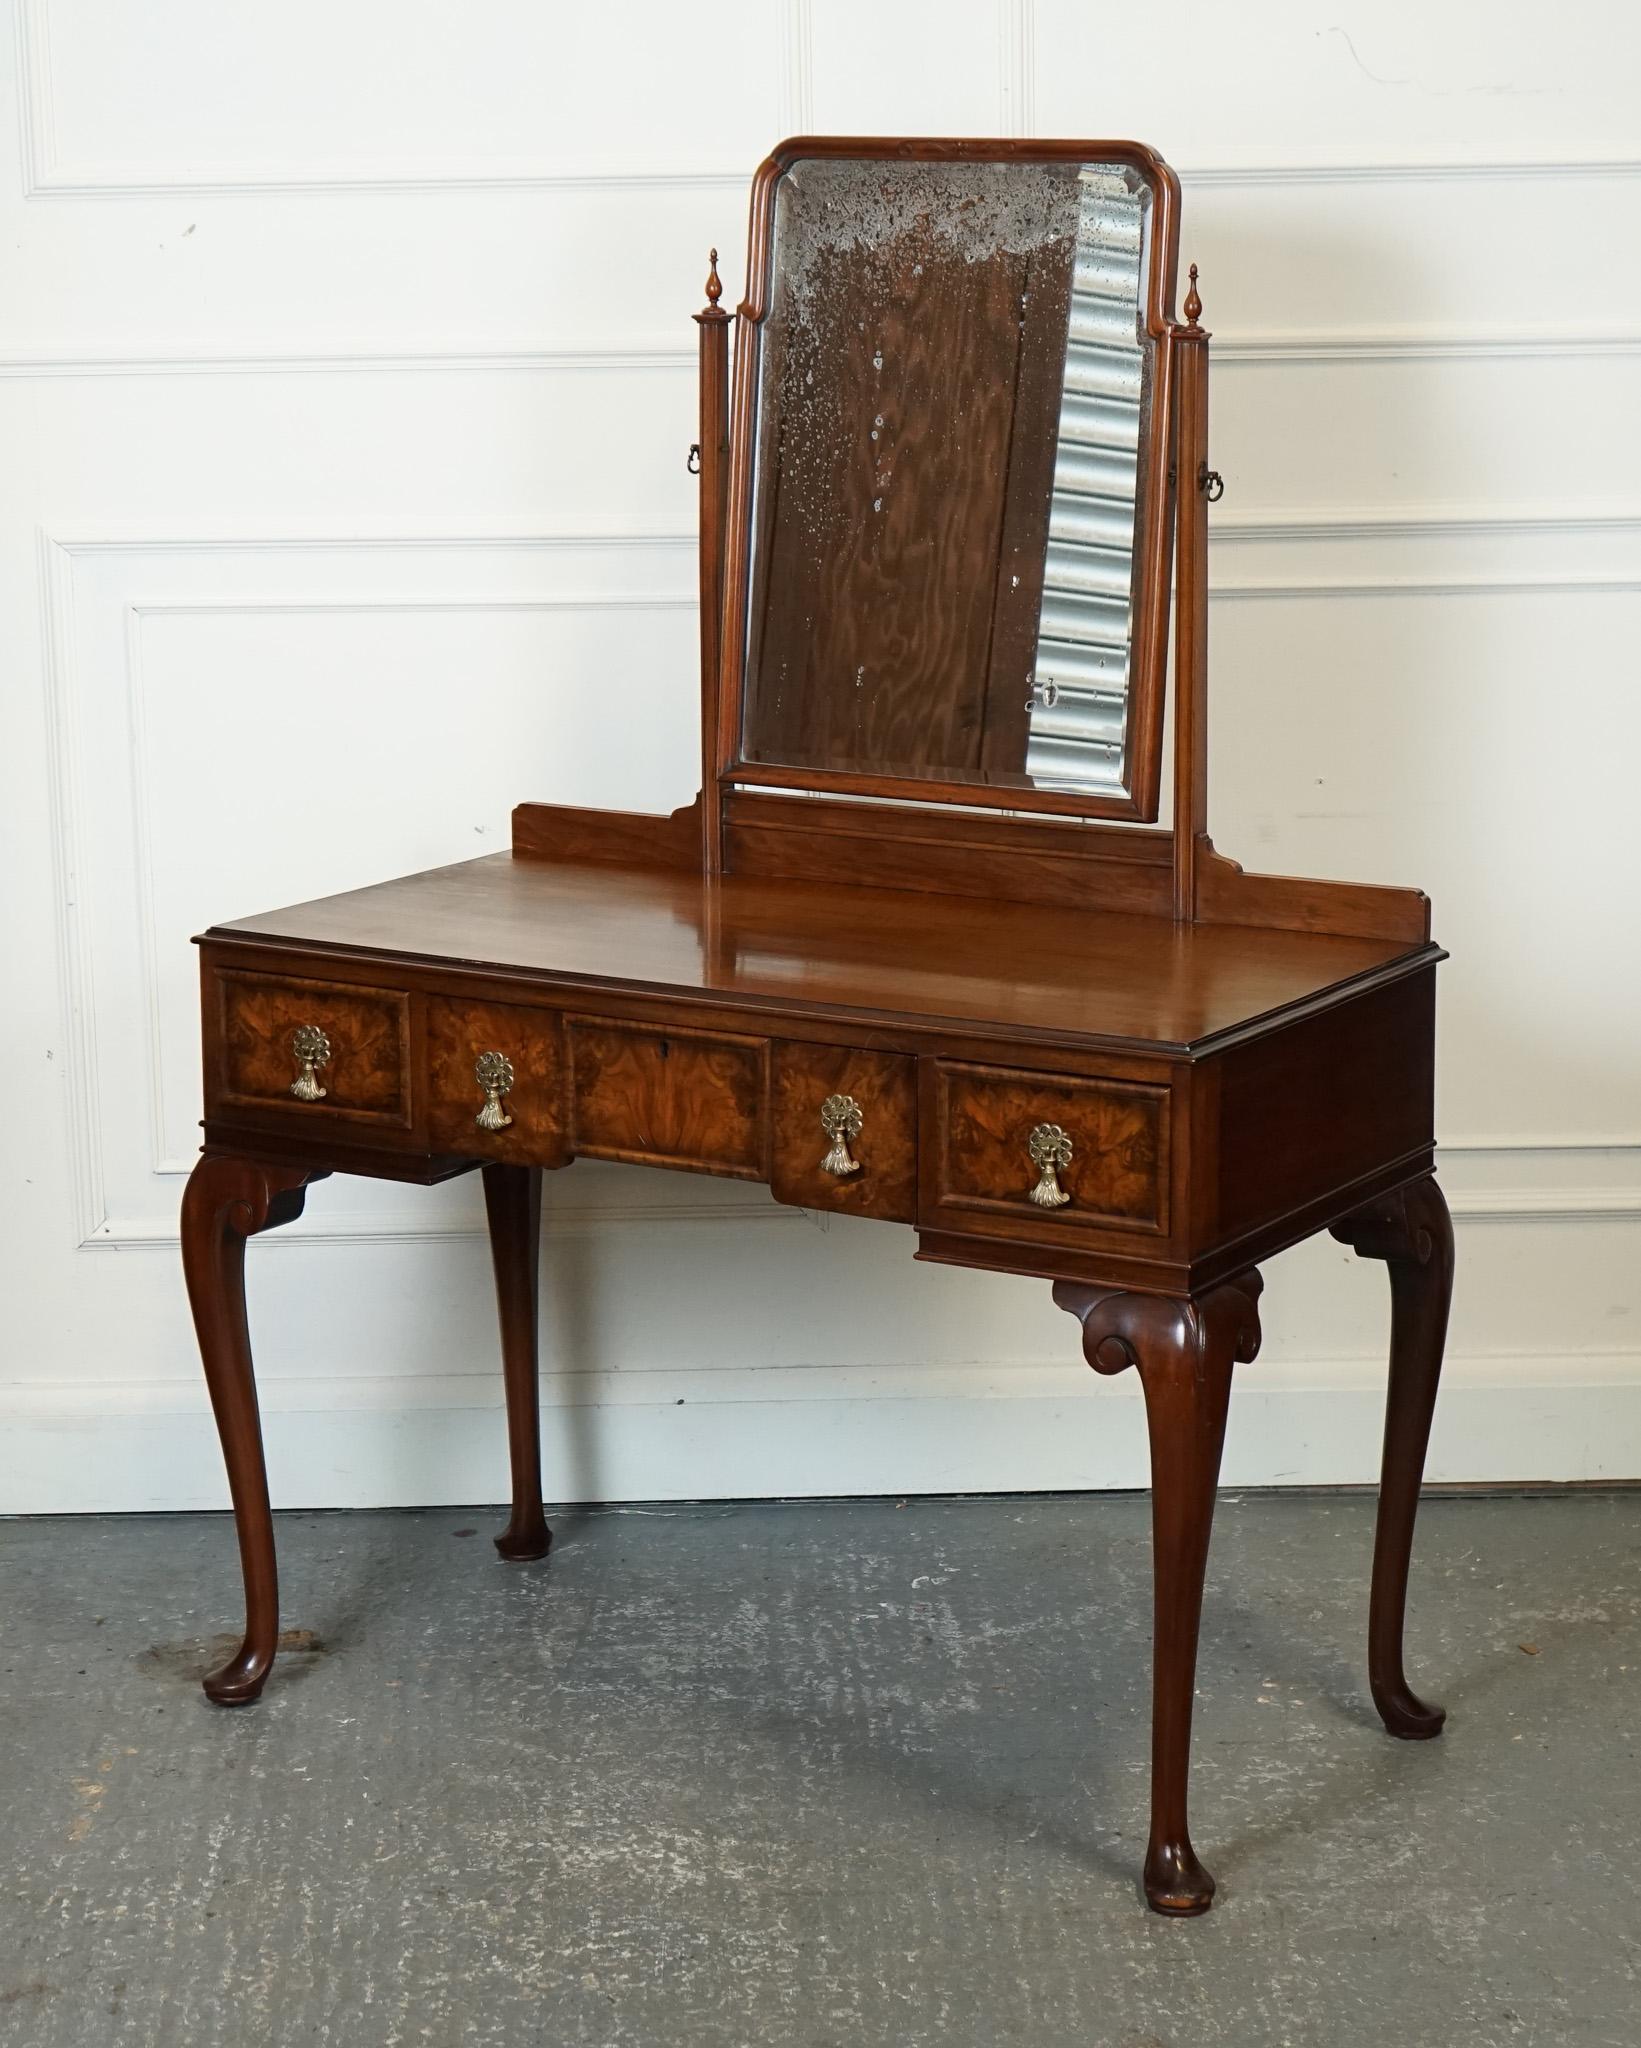 

We are delighted to offer for sale this Stunning Waring & Gillow Burr Walnut Dressing Table.

This would exude luxury and sophistication in any bedroom setting. This exquisite piece of furniture would be meticulously crafted with attention to